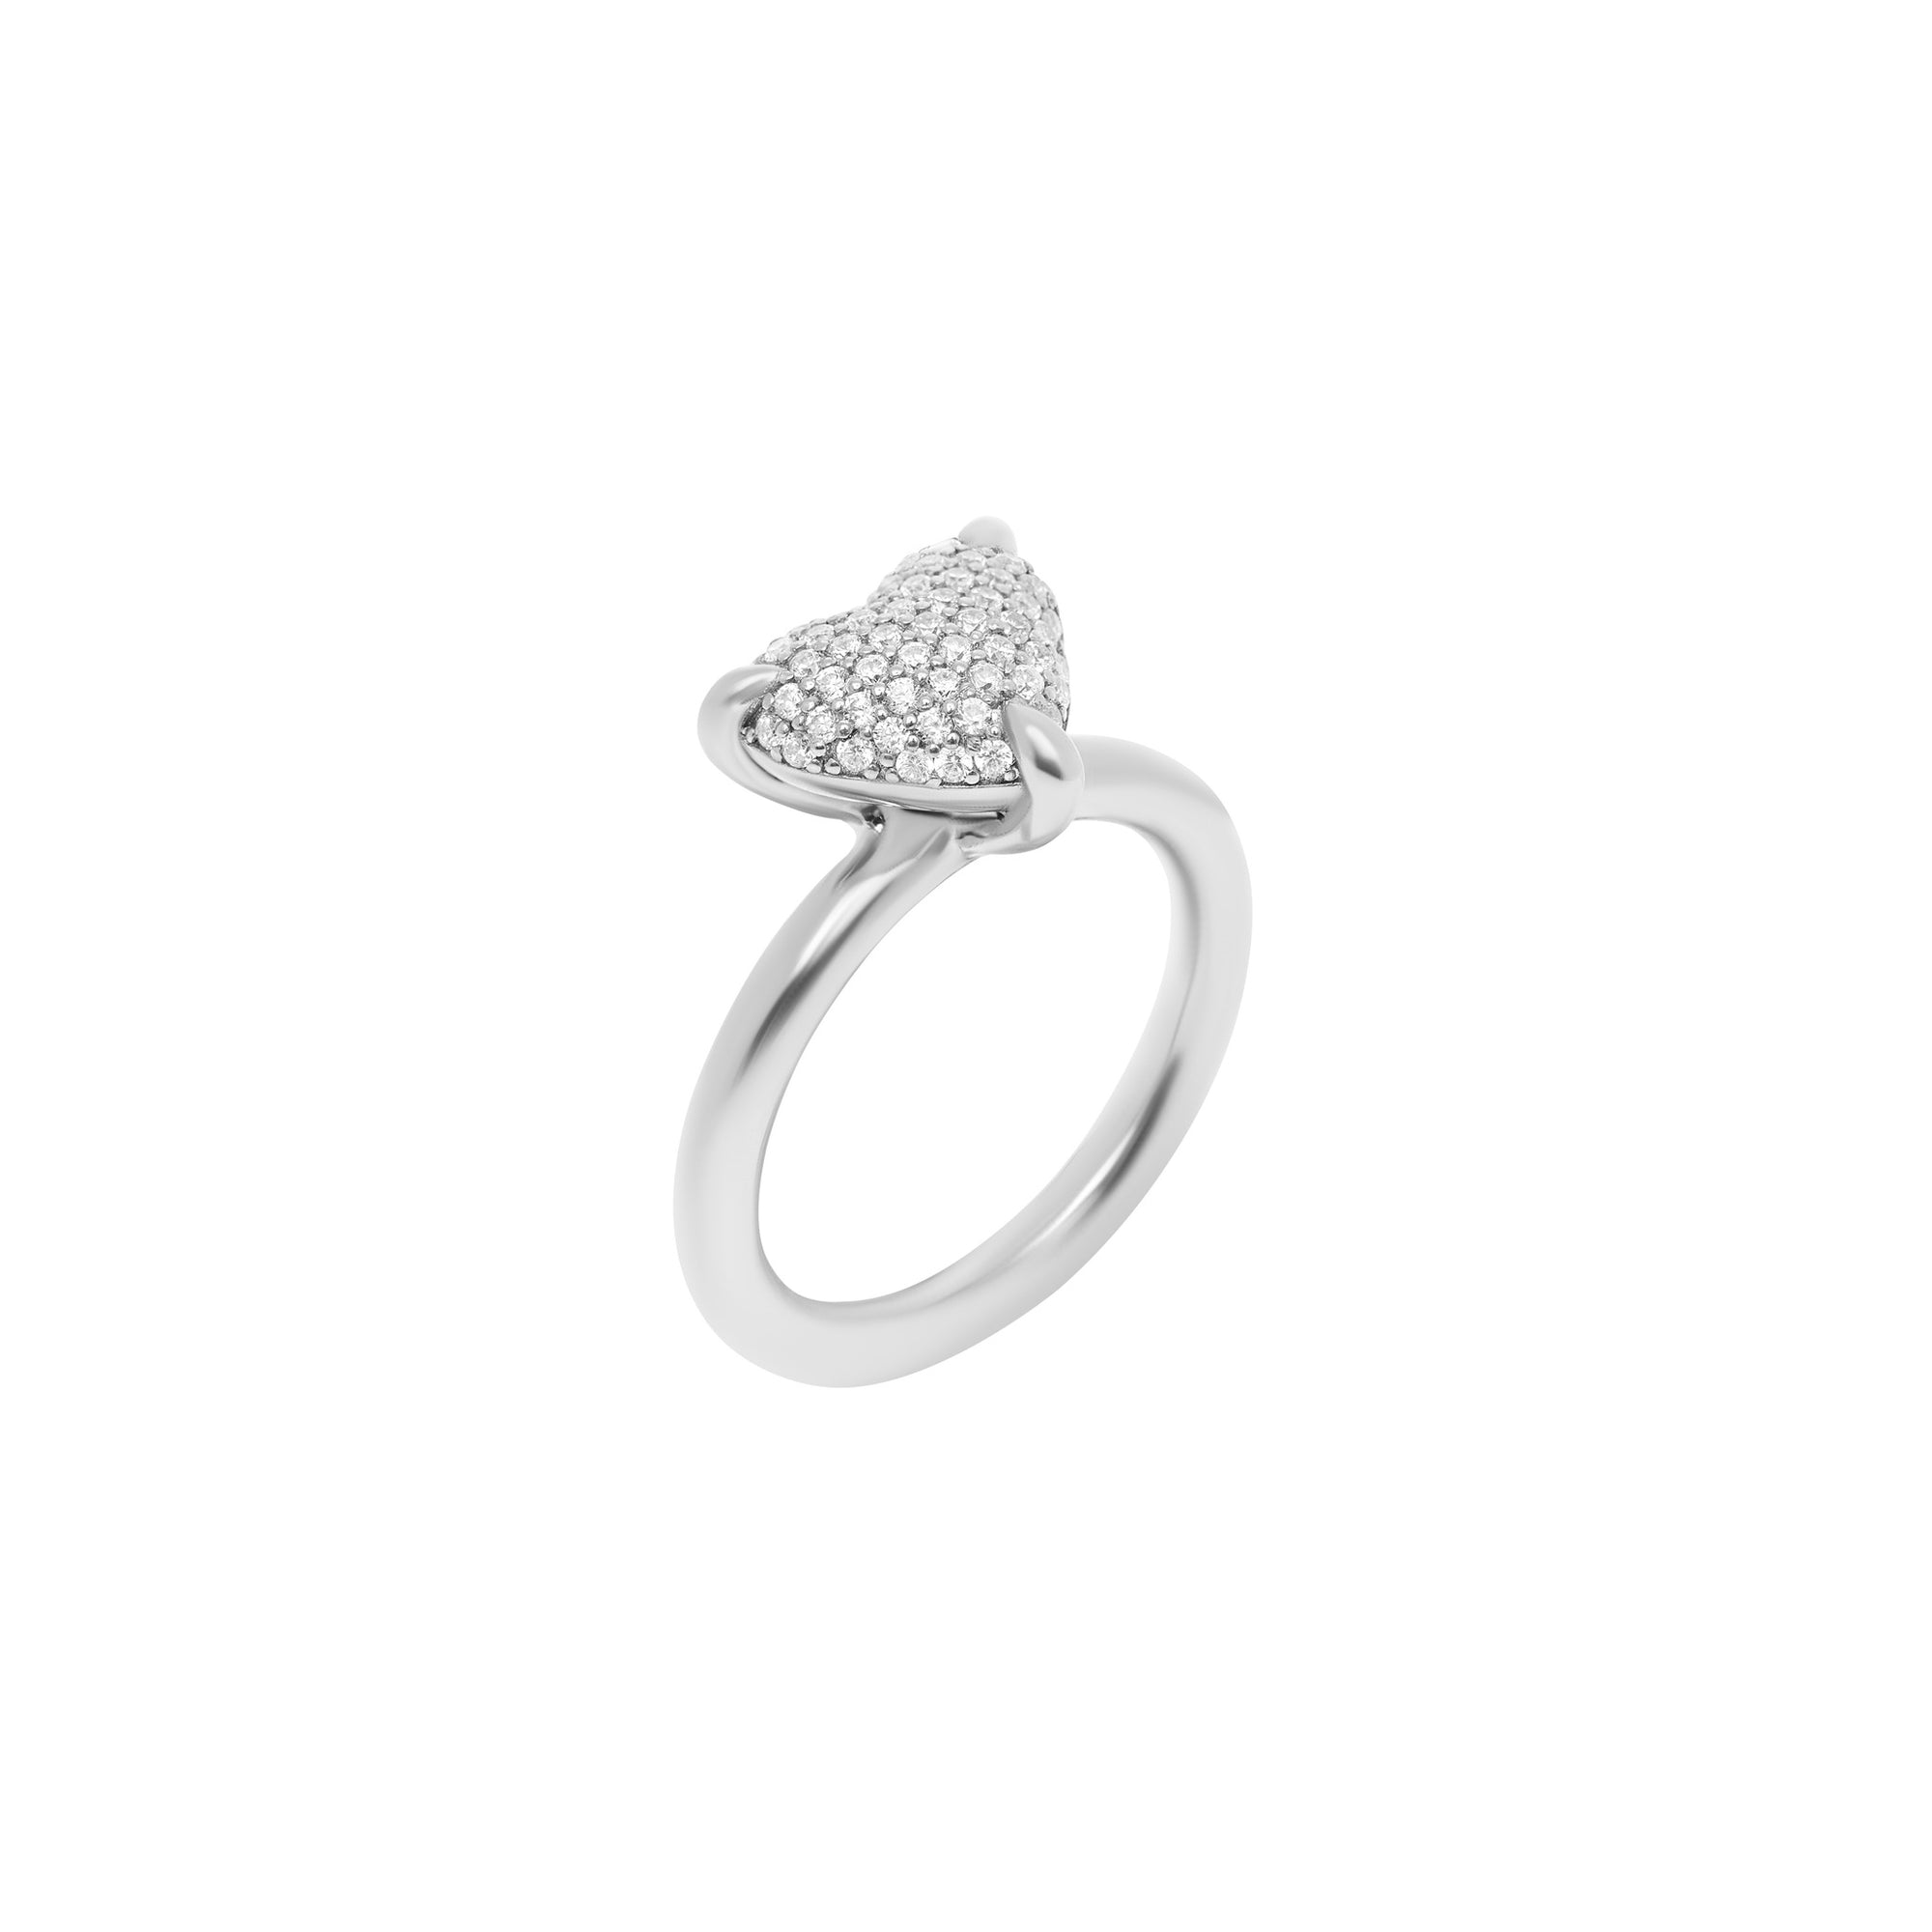 Ring 'Big Spangled Heart' – Silver